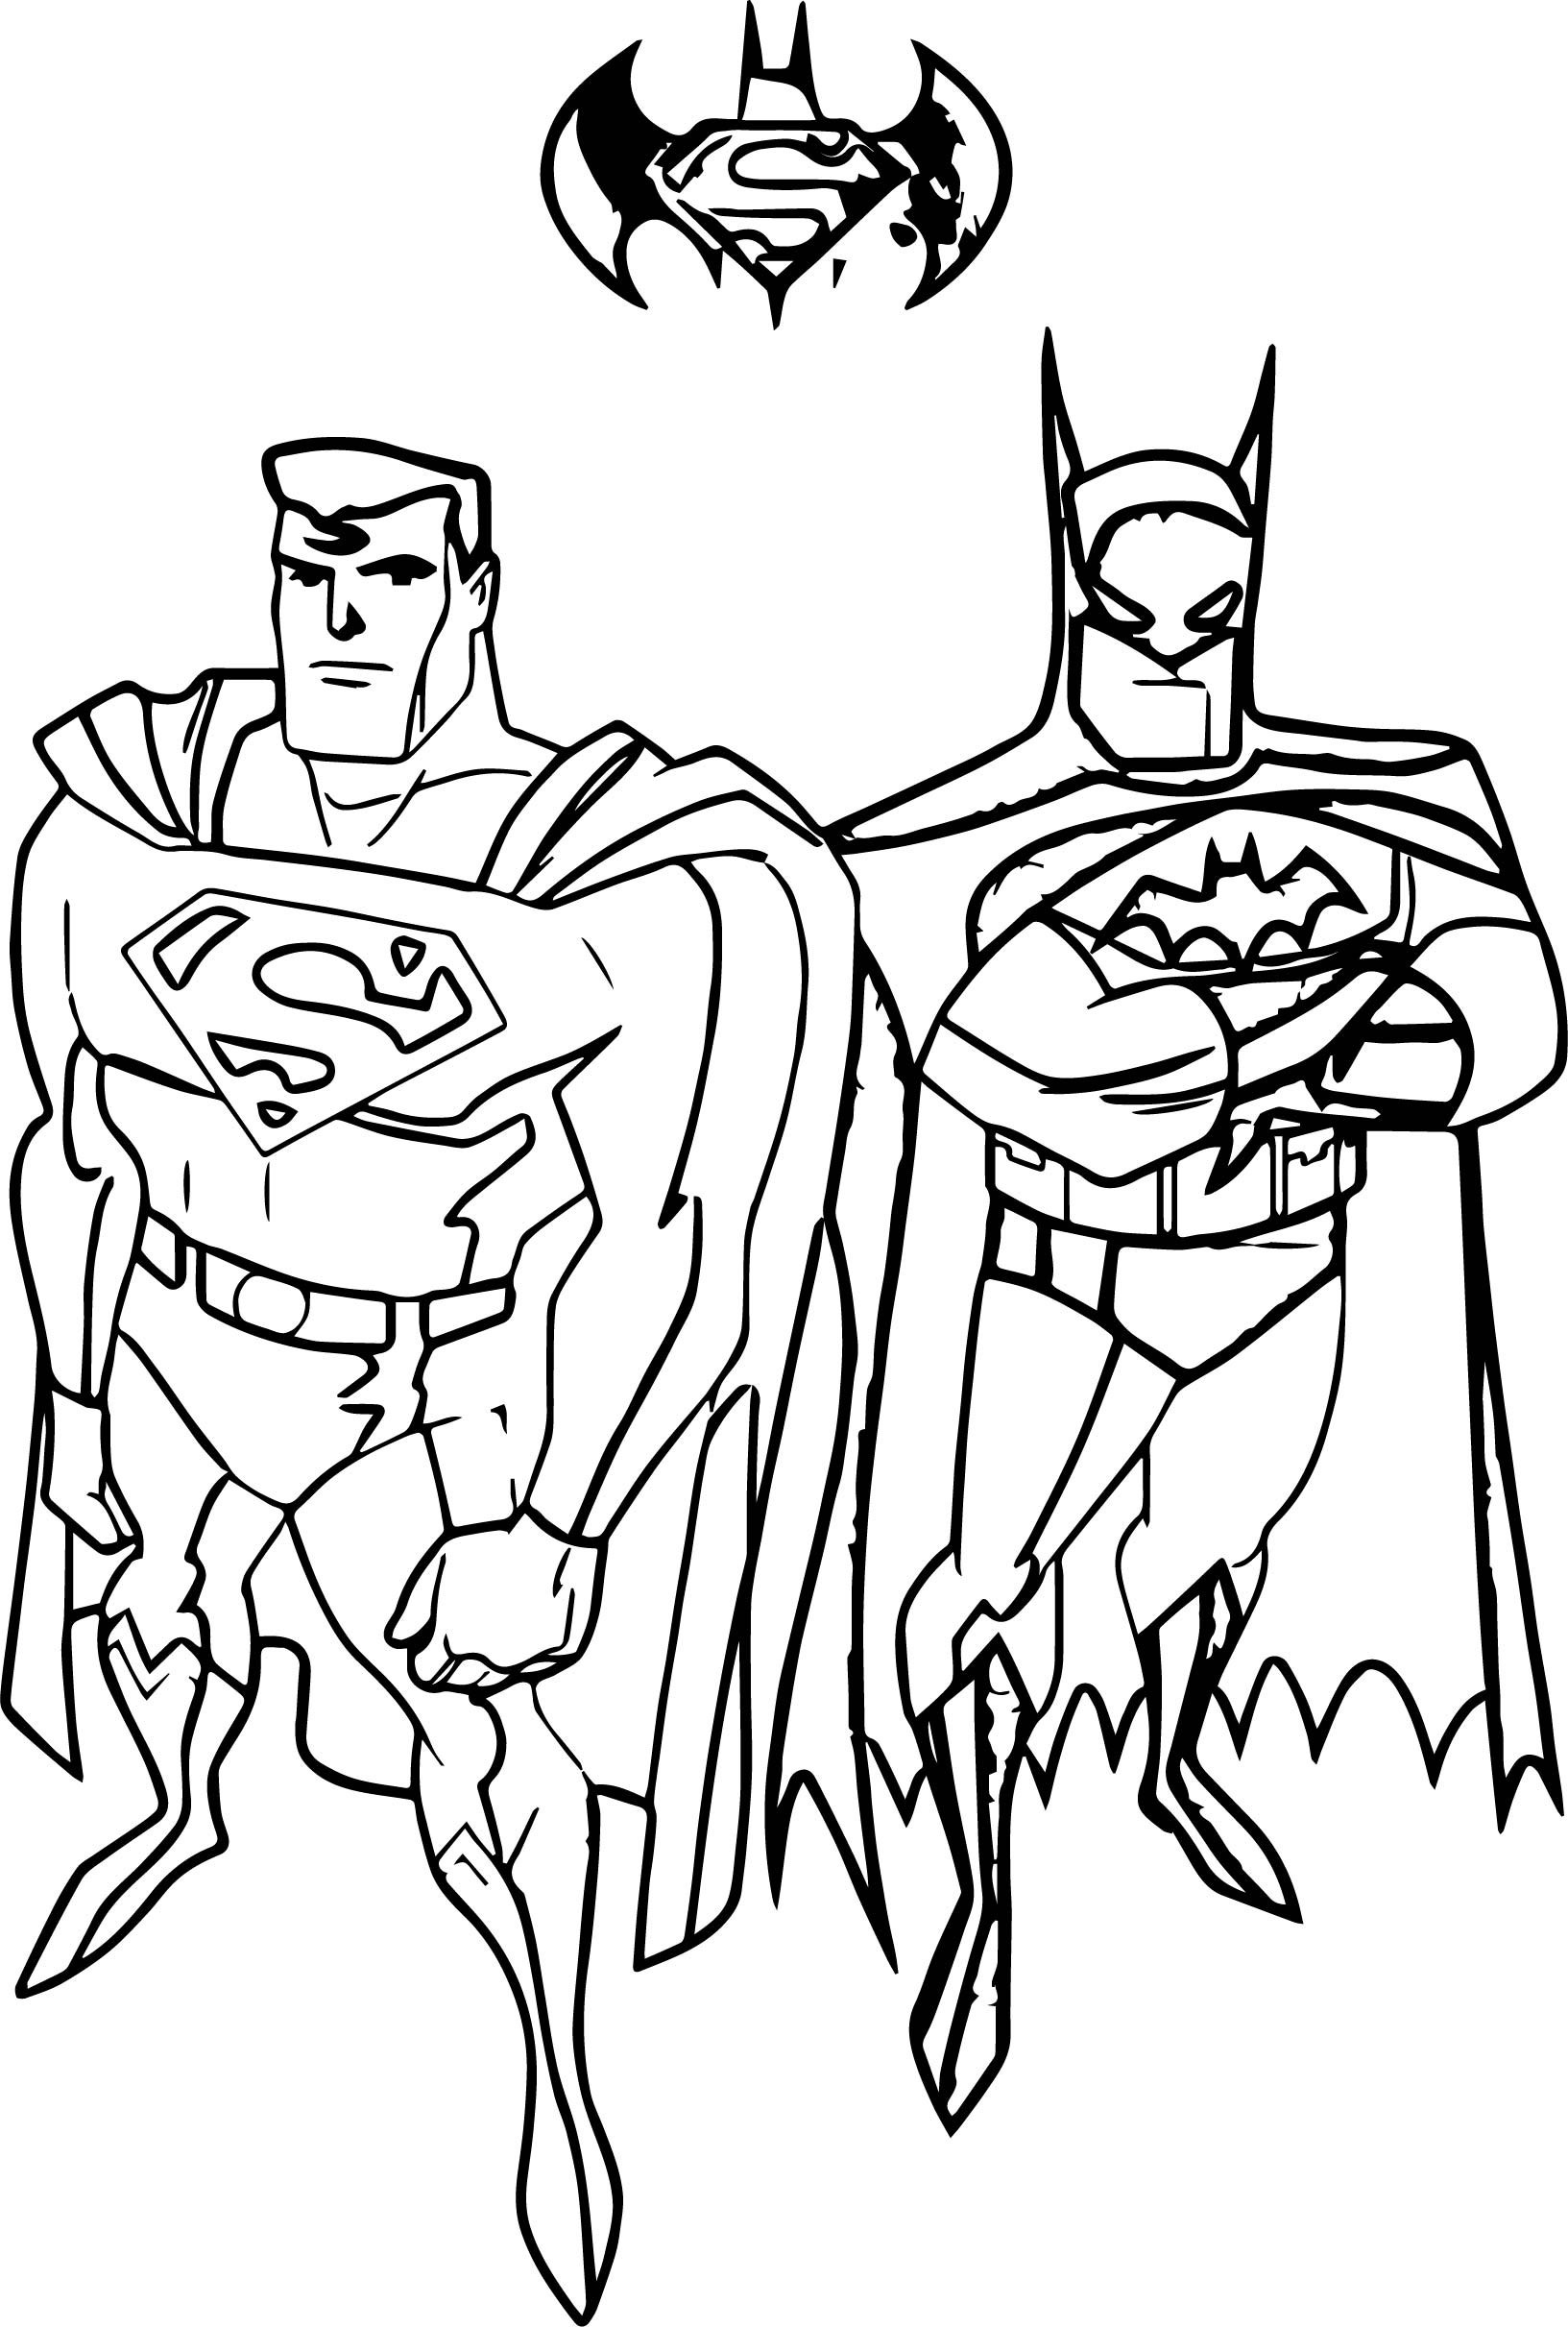 Lego Superman Coloring Pages at GetColorings.com | Free ...